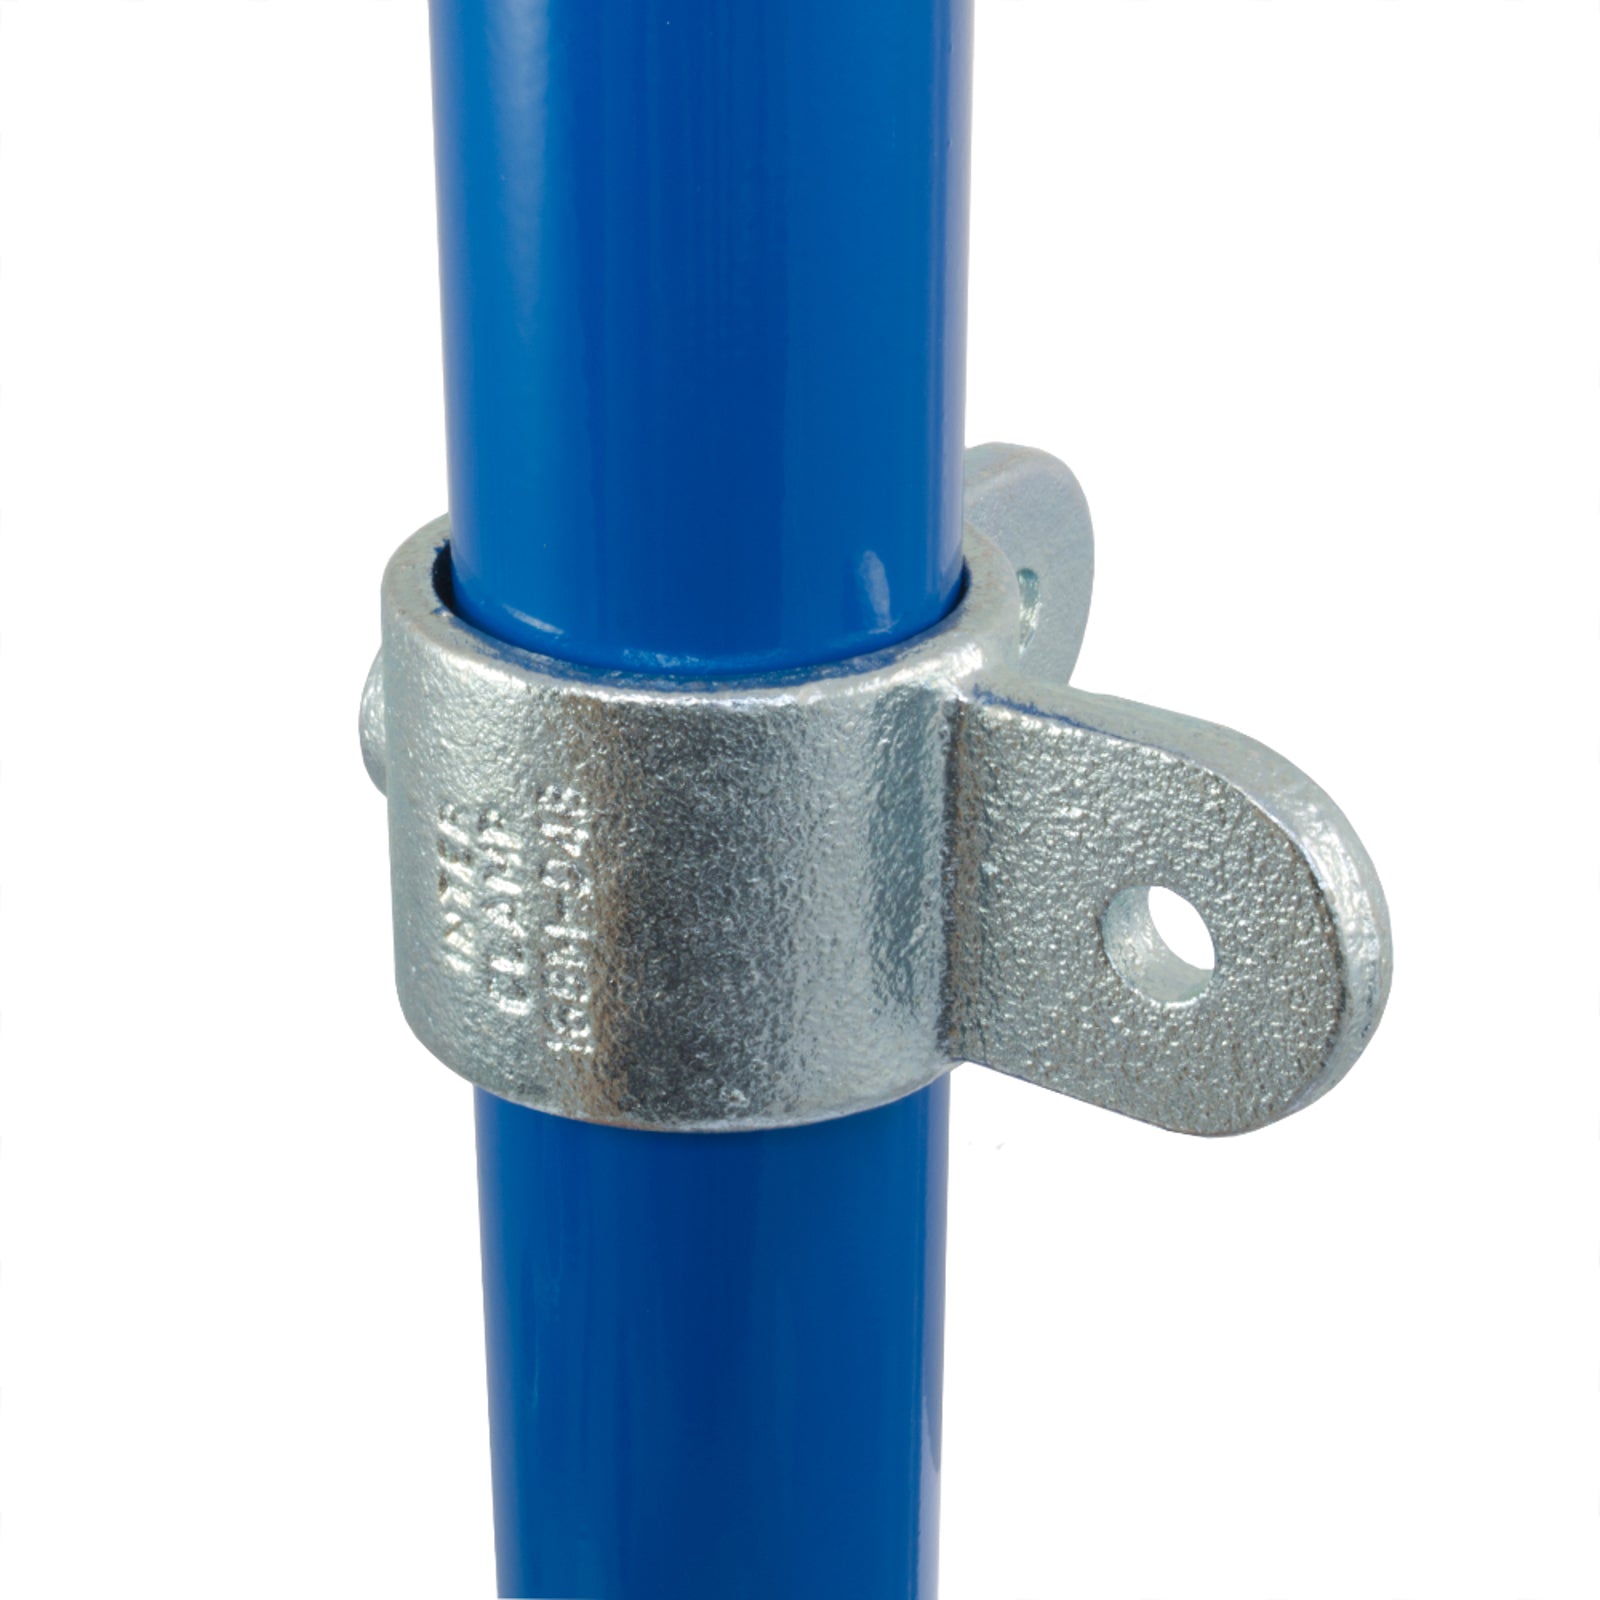 Corner Swivel Combination Male Part, Interclamp Code 168M. Shop rail, pipe and fence fittings online chain.com.au. Australia wide shipping.